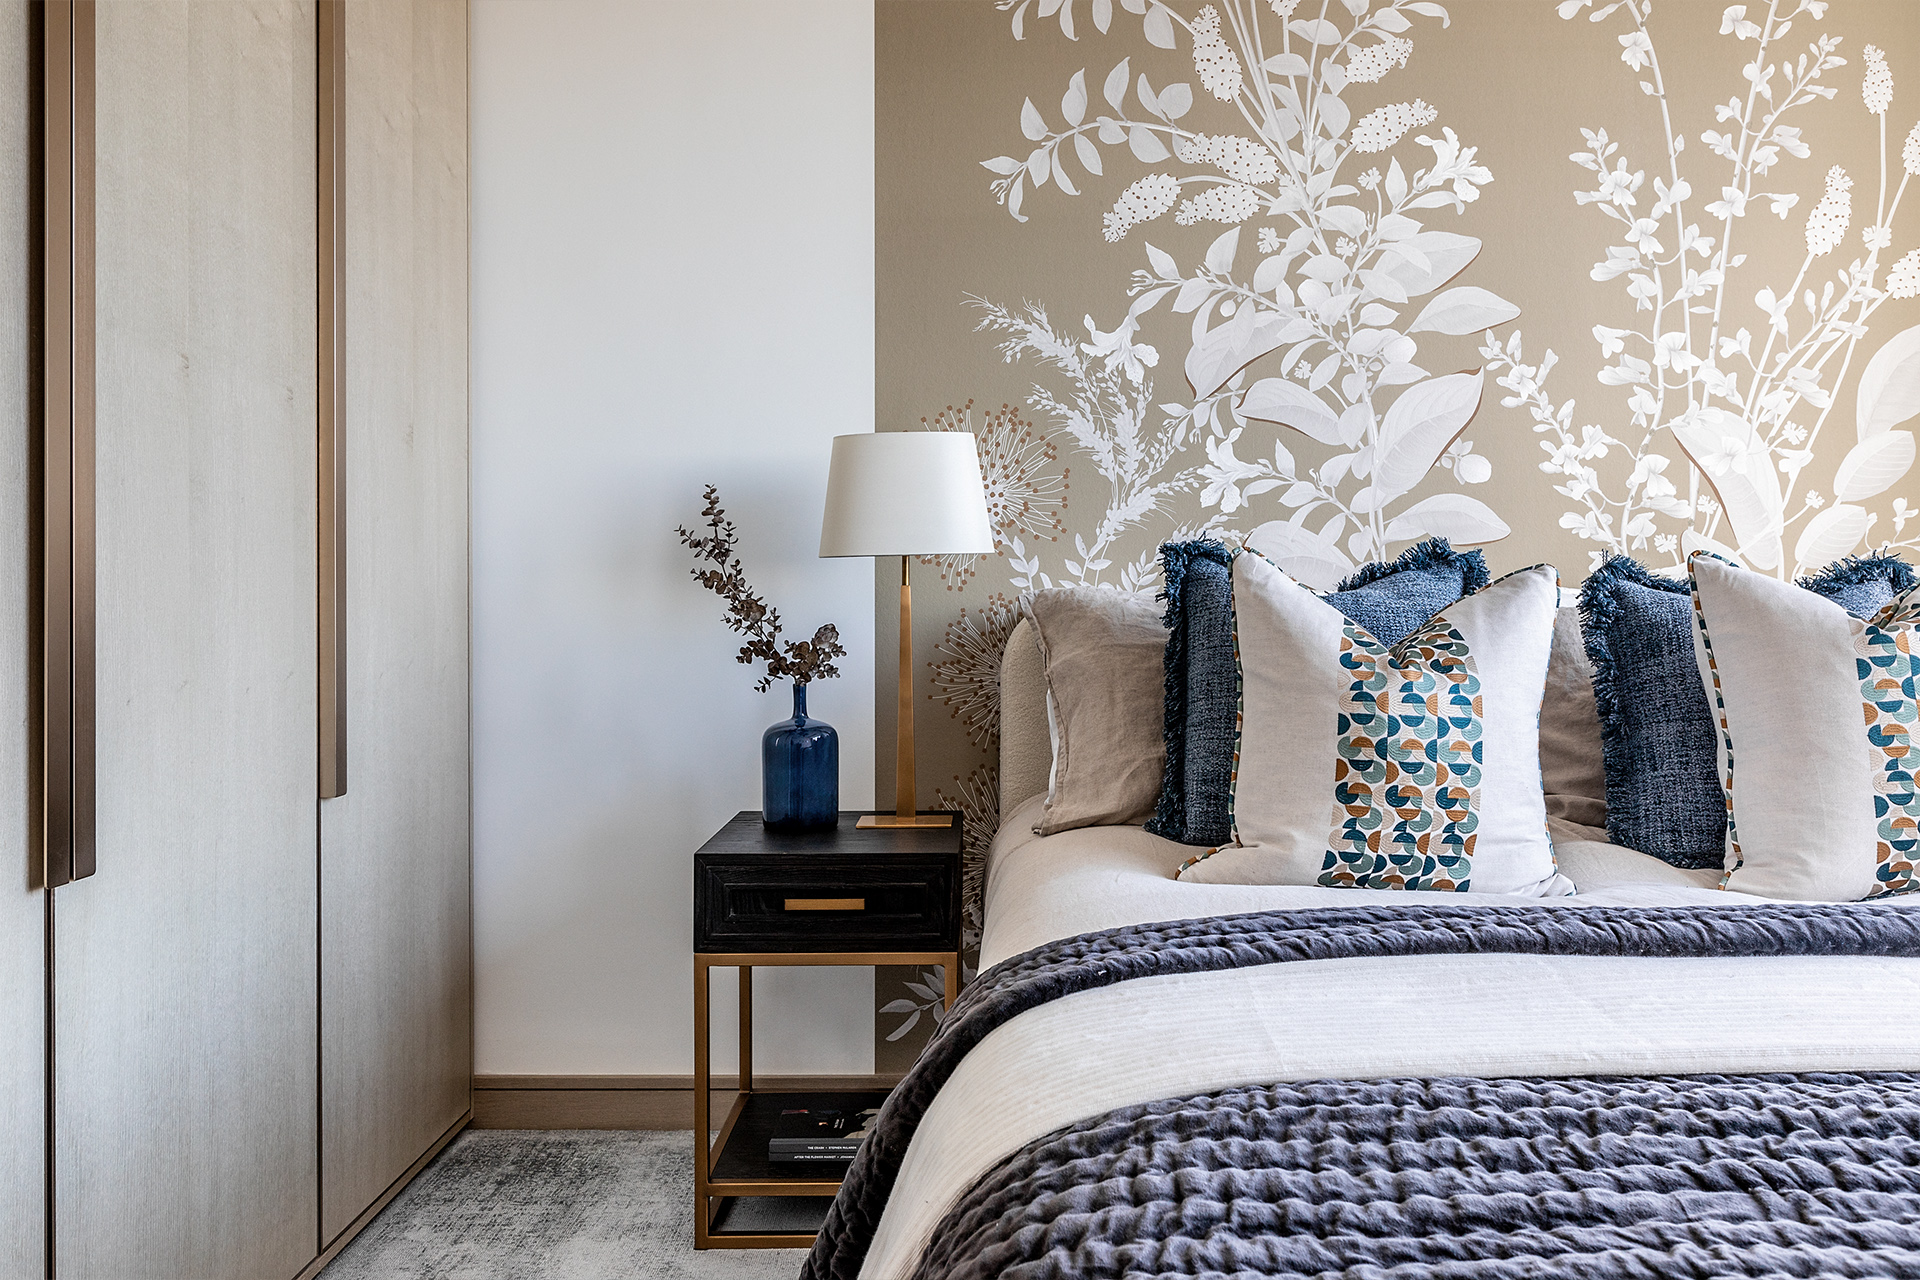 One St. John's Wood | Natural elements combine for a serene bedroom | Angel O'Donnell